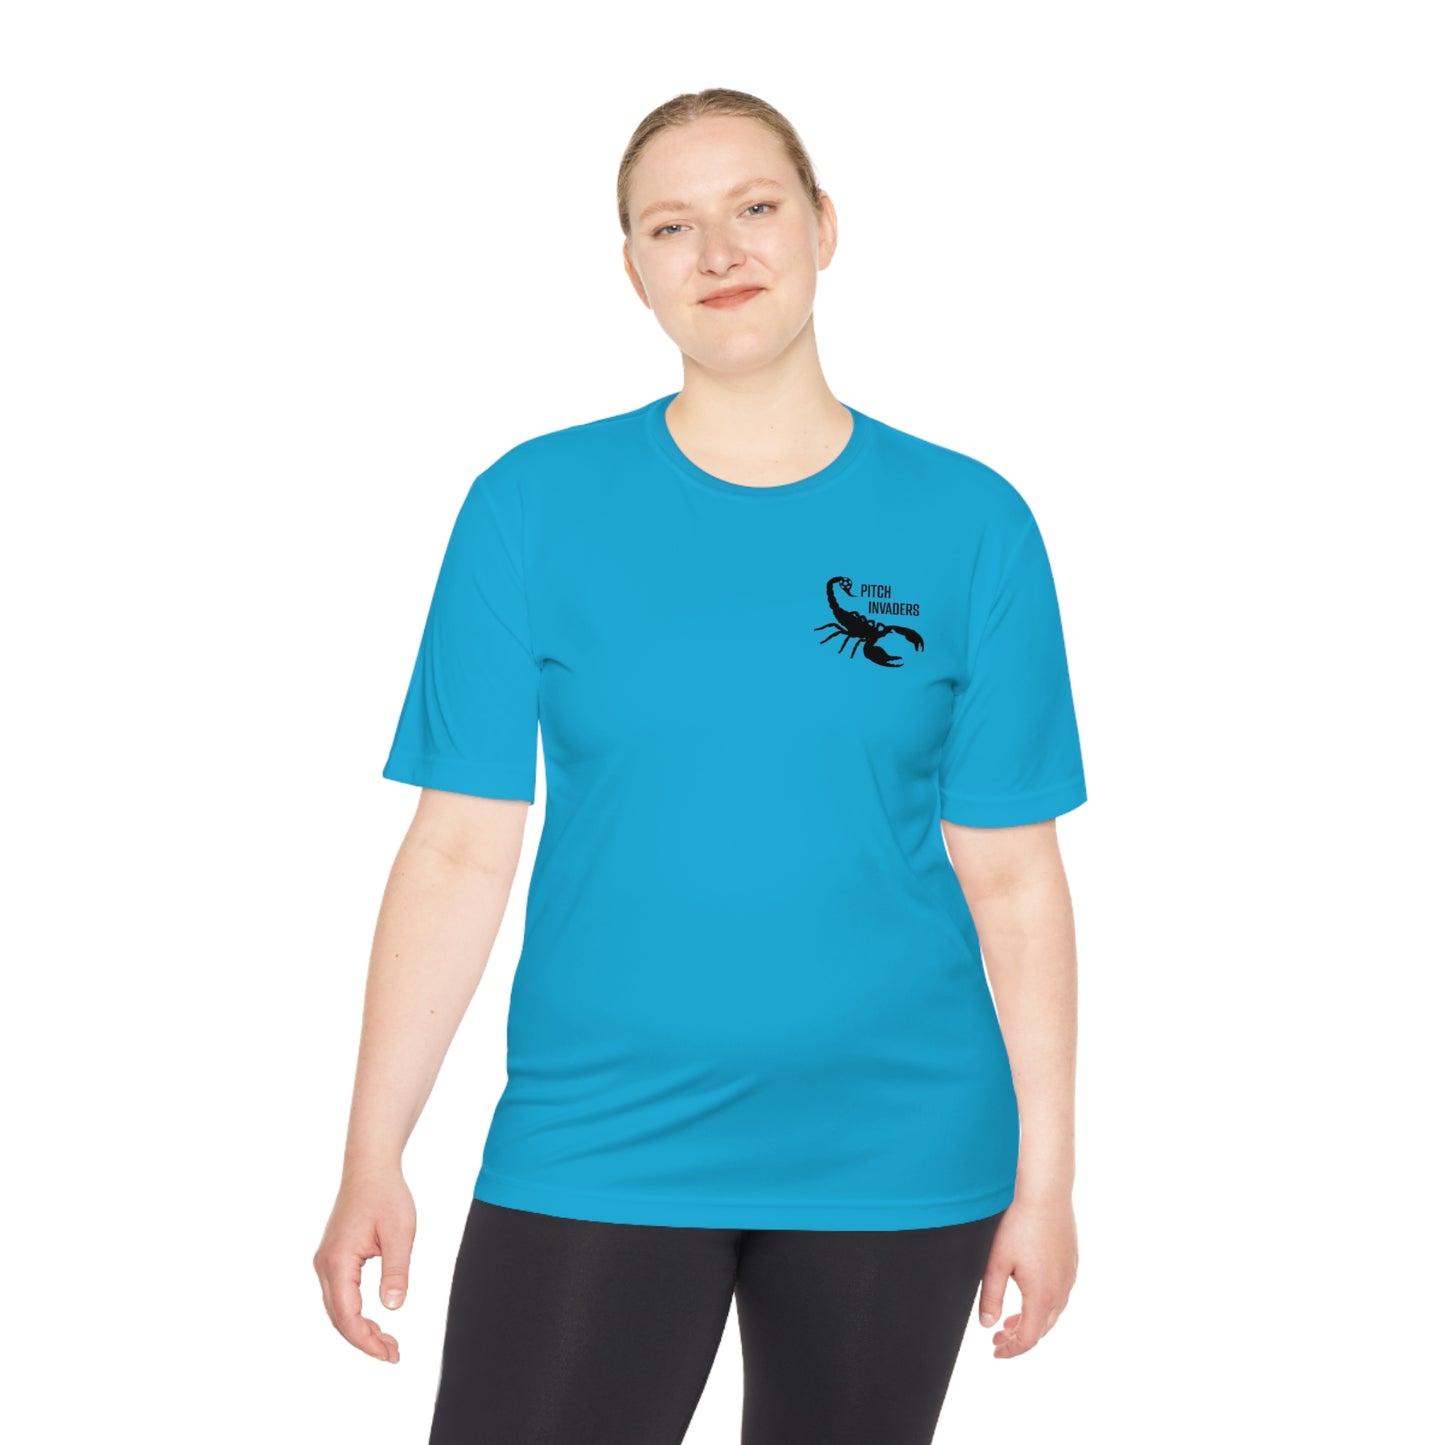 FÚTBALLERS ONLY Athletic T-Shirt (Unisex)